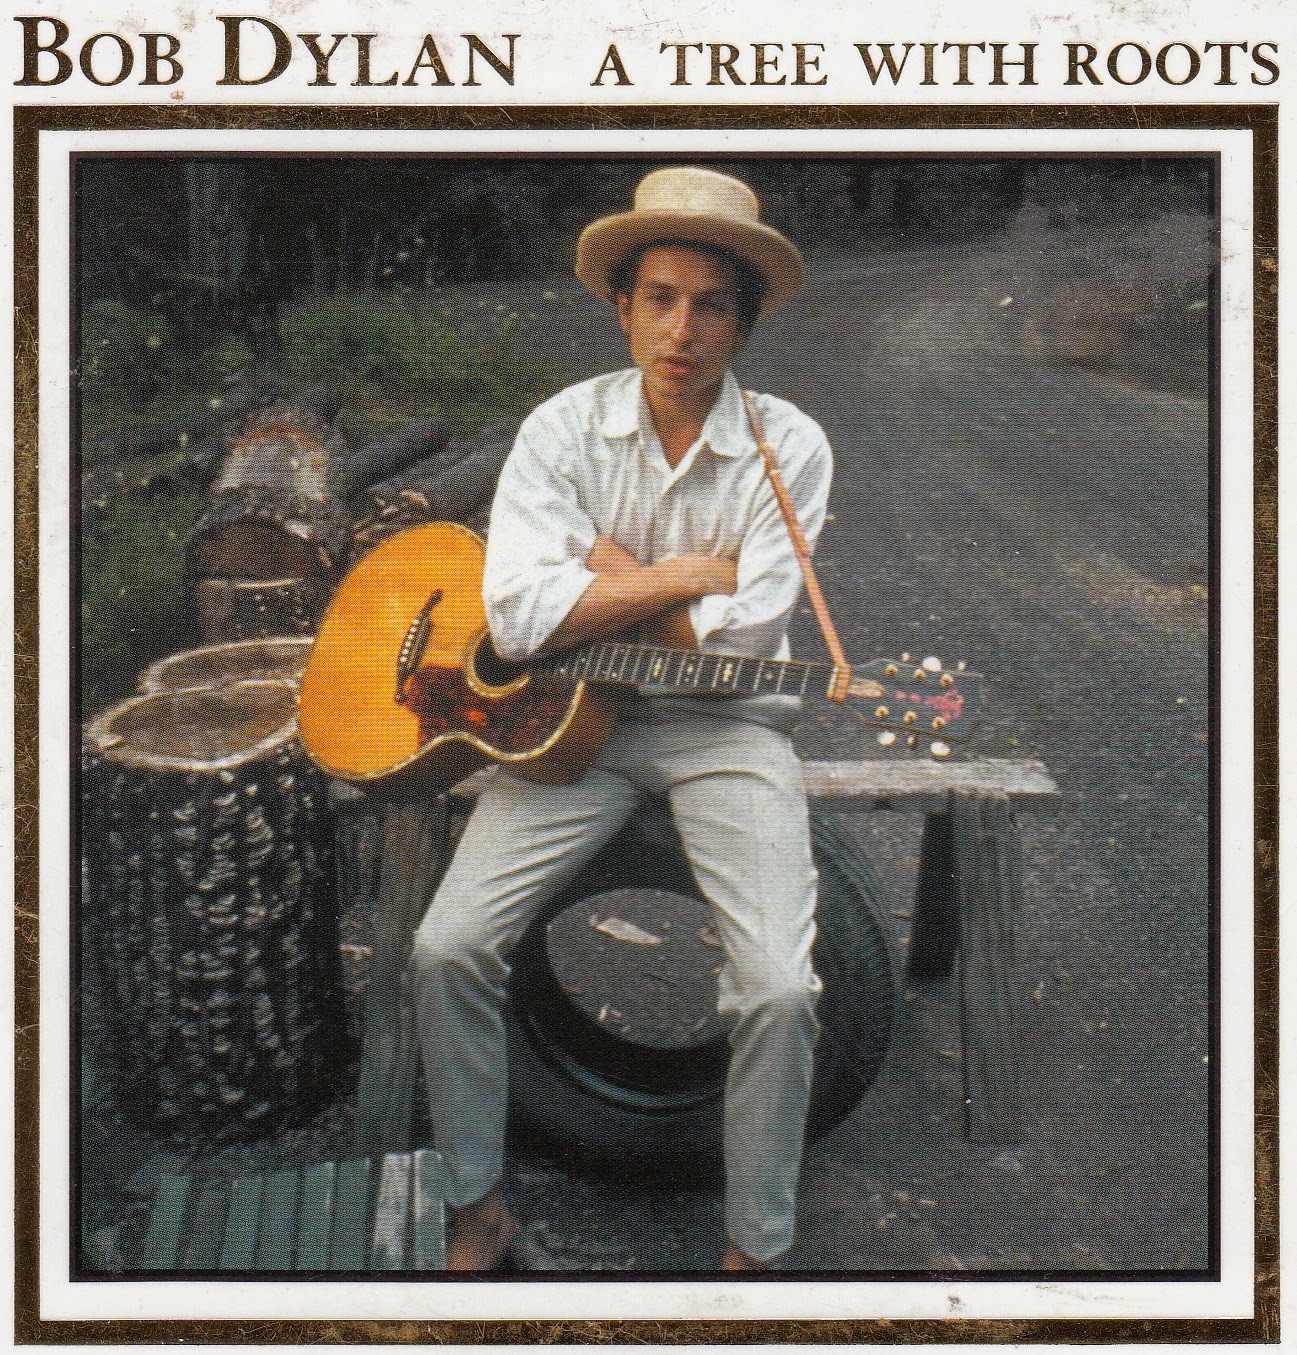 ESSAYS ON BOB DYLAN BY JIM LINDERMAN To Live Outside The Law You